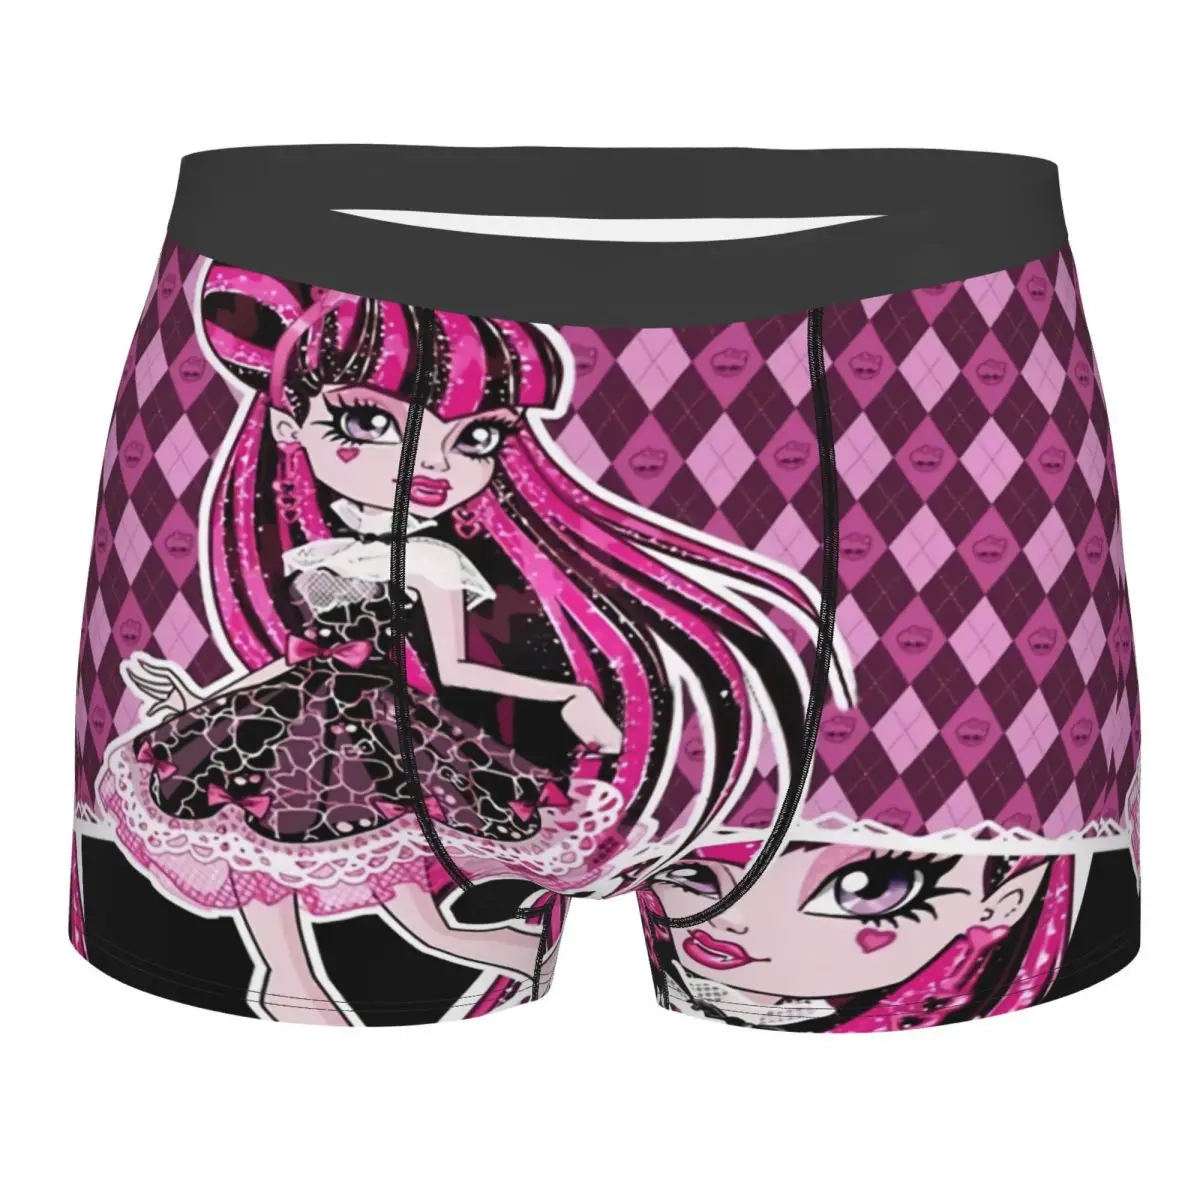 

Draculaura Man's Boxer Briefs Monster High Doll Highly Breathable Underpants Top Quality Print Shorts Gift Idea